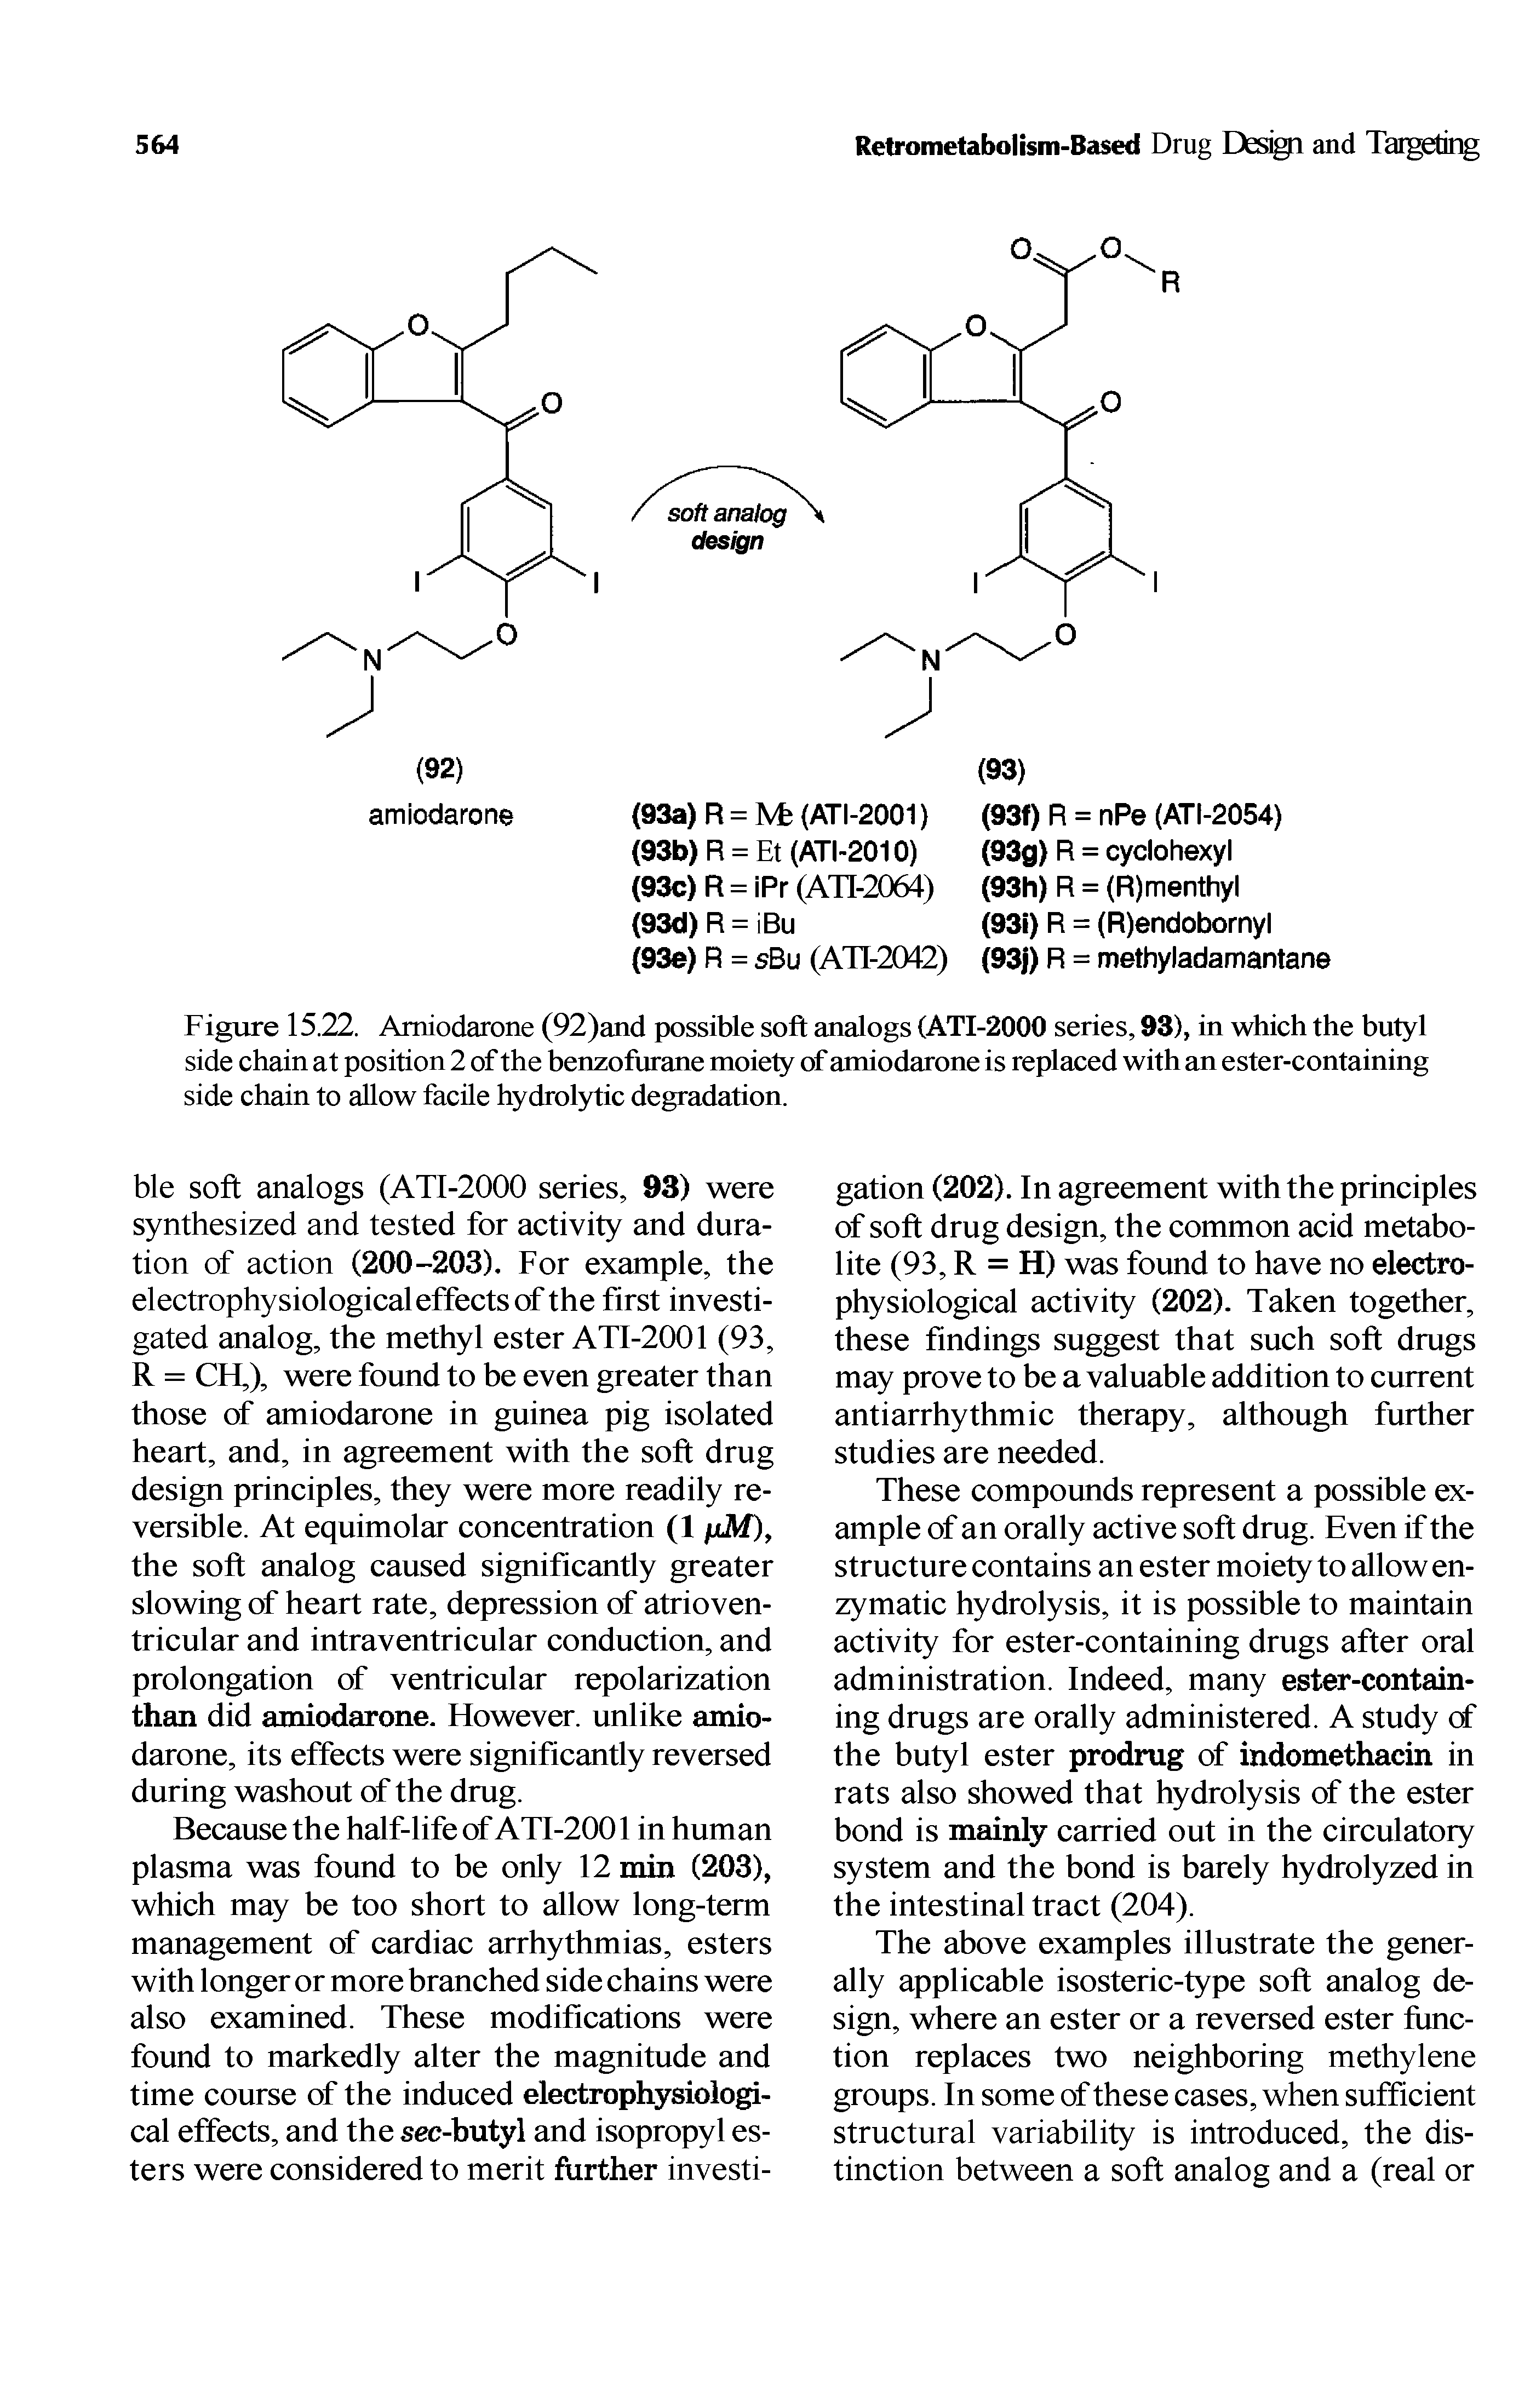 Figure 15.22. Amiodarone (92)and possible soft analogs (ATI-2000 series, 93), in which the butyl side chain at position 2 of the benzofurane moiety of amiodarone is replaced with an ester-containing side chain to allow facile hydrolytic degradation.